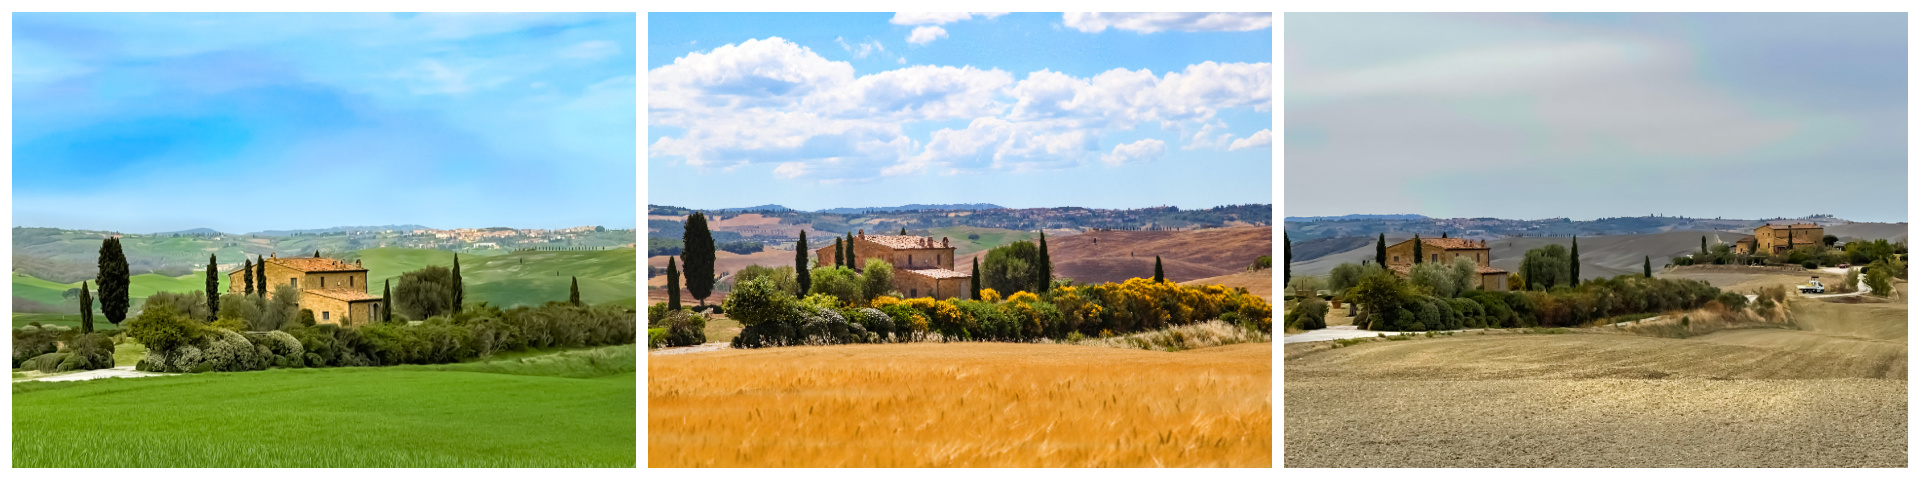 What are the best months of the year to visit Tuscany